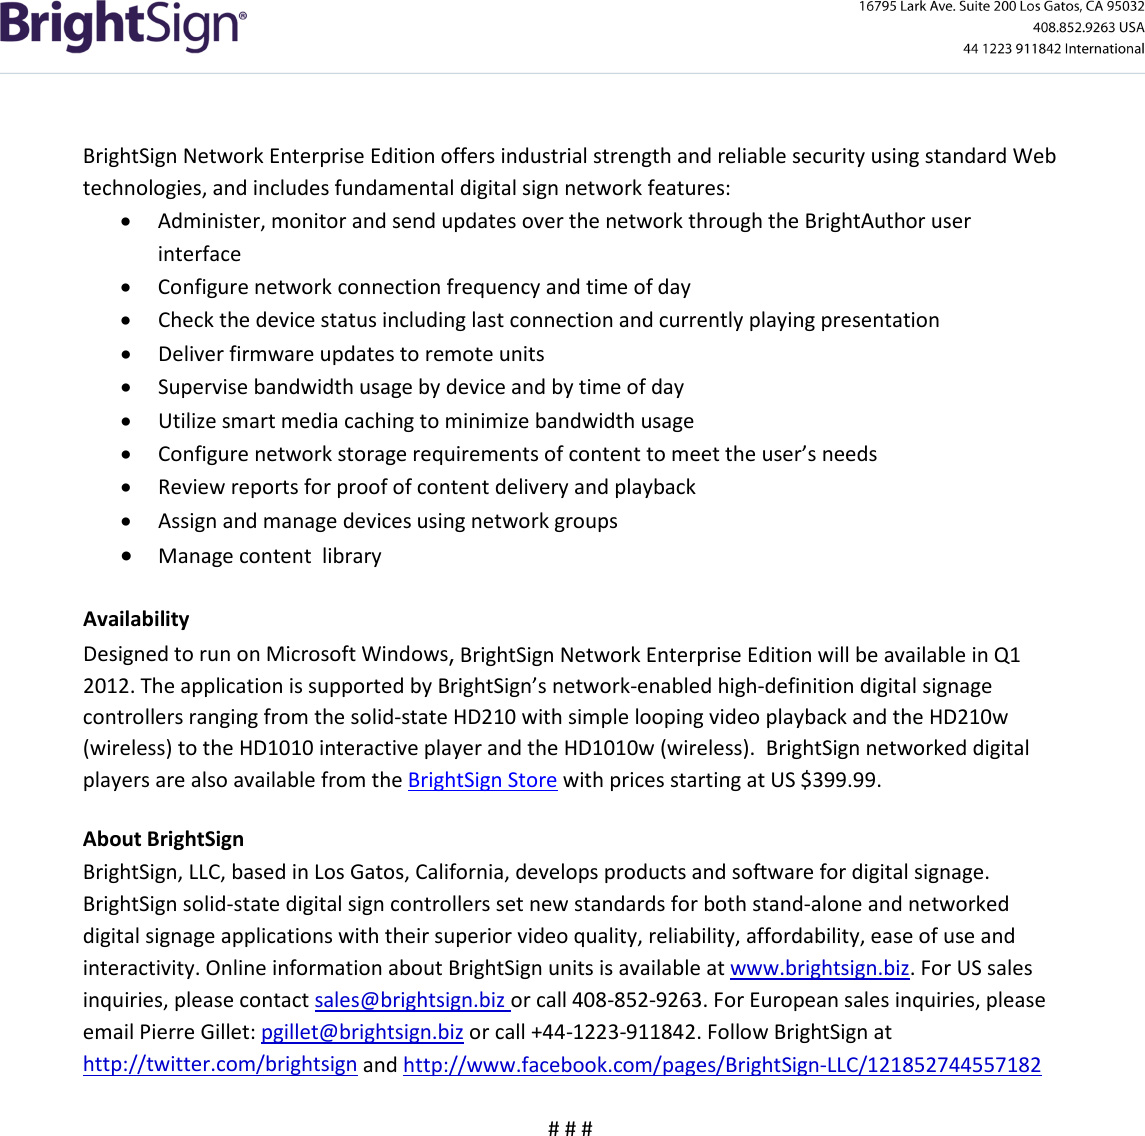 Page 2 of 2 - Bright Sign Launches New Enterprise Edition Of Cloud-based Network Software At ISE